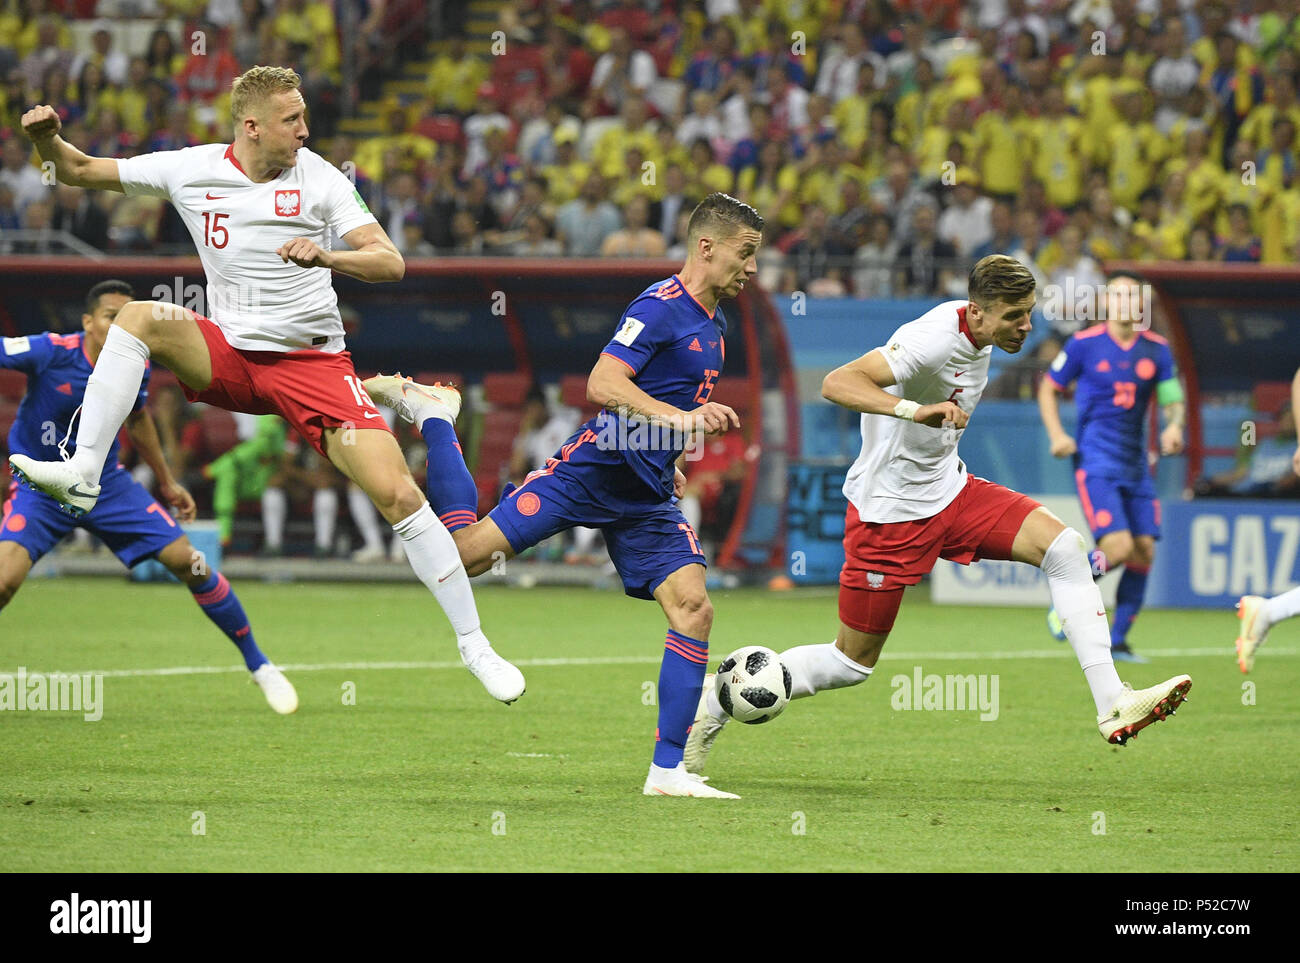 Kazan, Russia. 24th June, 2018. Mateus Uribe (C) of Colombia breaks through with the ball during the 2018 FIFA World Cup Group H match between Poland and Colombia in Kazan, Russia, June 24, 2018. Colombia won 3-0. Credit: Lui Siu Wai/Xinhua/Alamy Live News Stock Photo